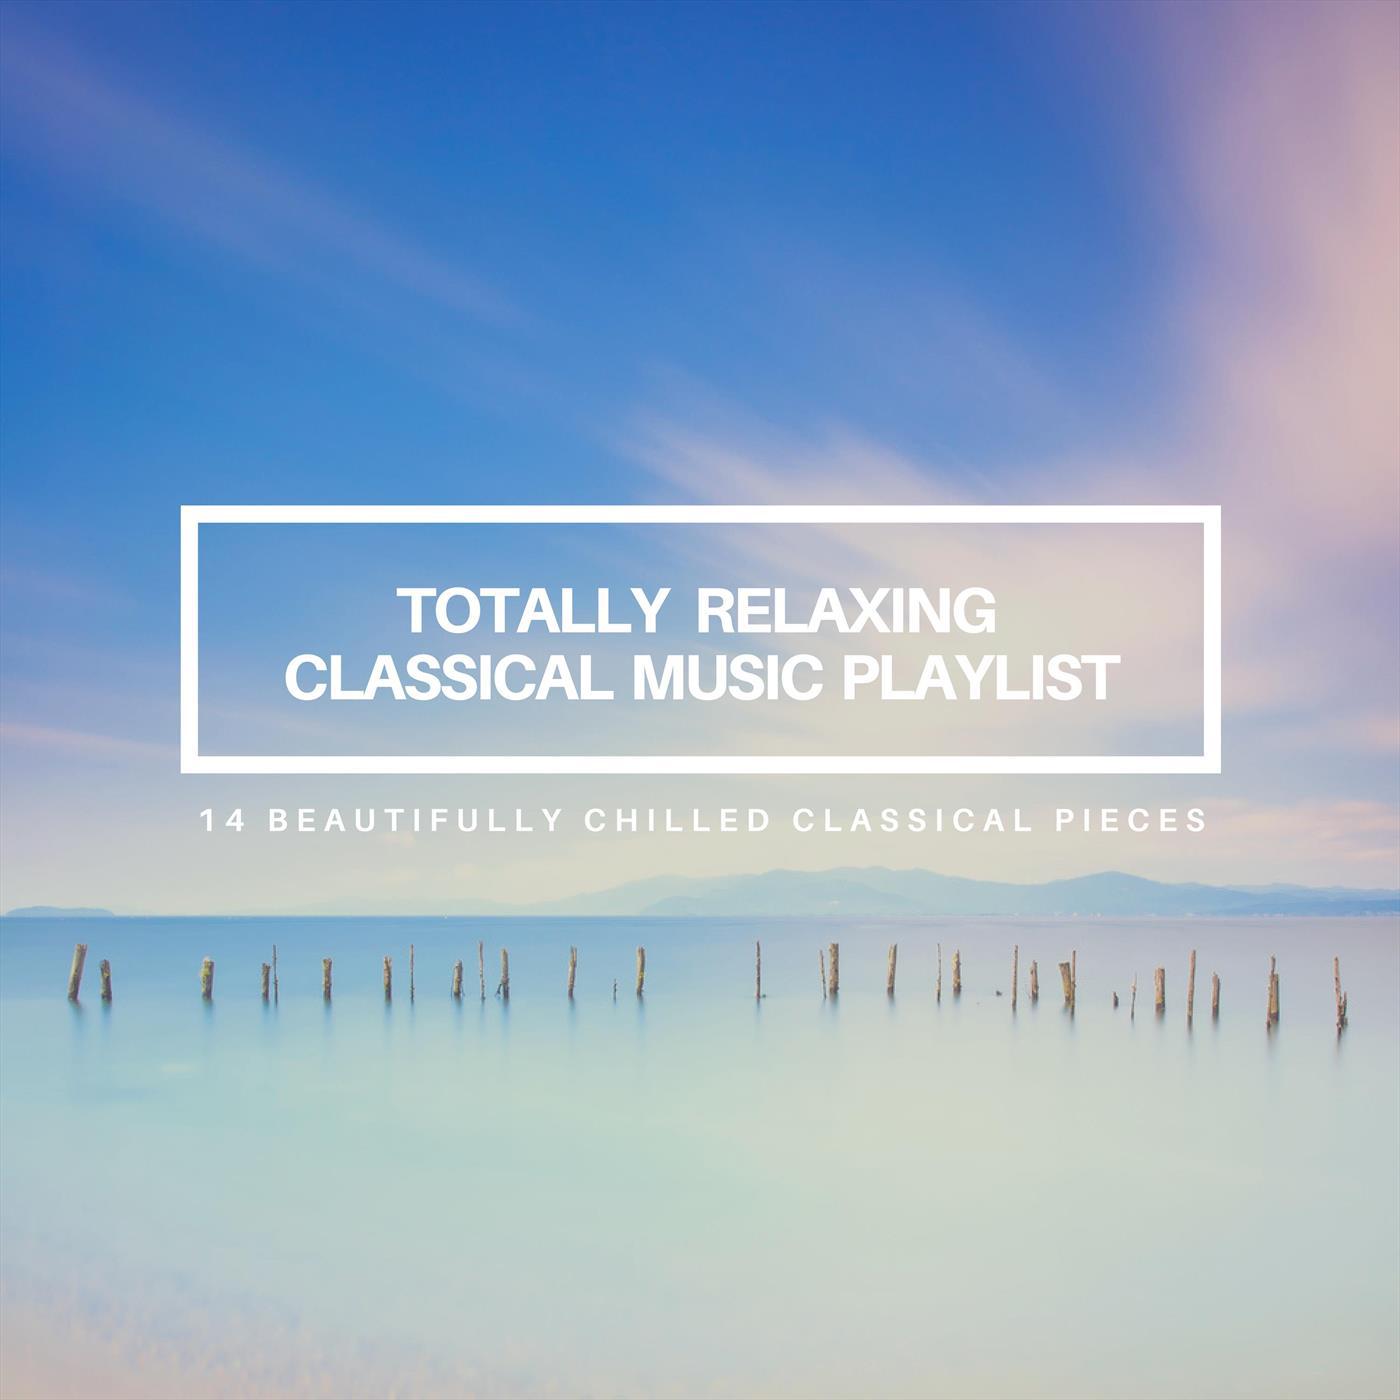 Totally Relaxing Classical Music Playlist: 14 Beautifully Chilled Classical Pieces